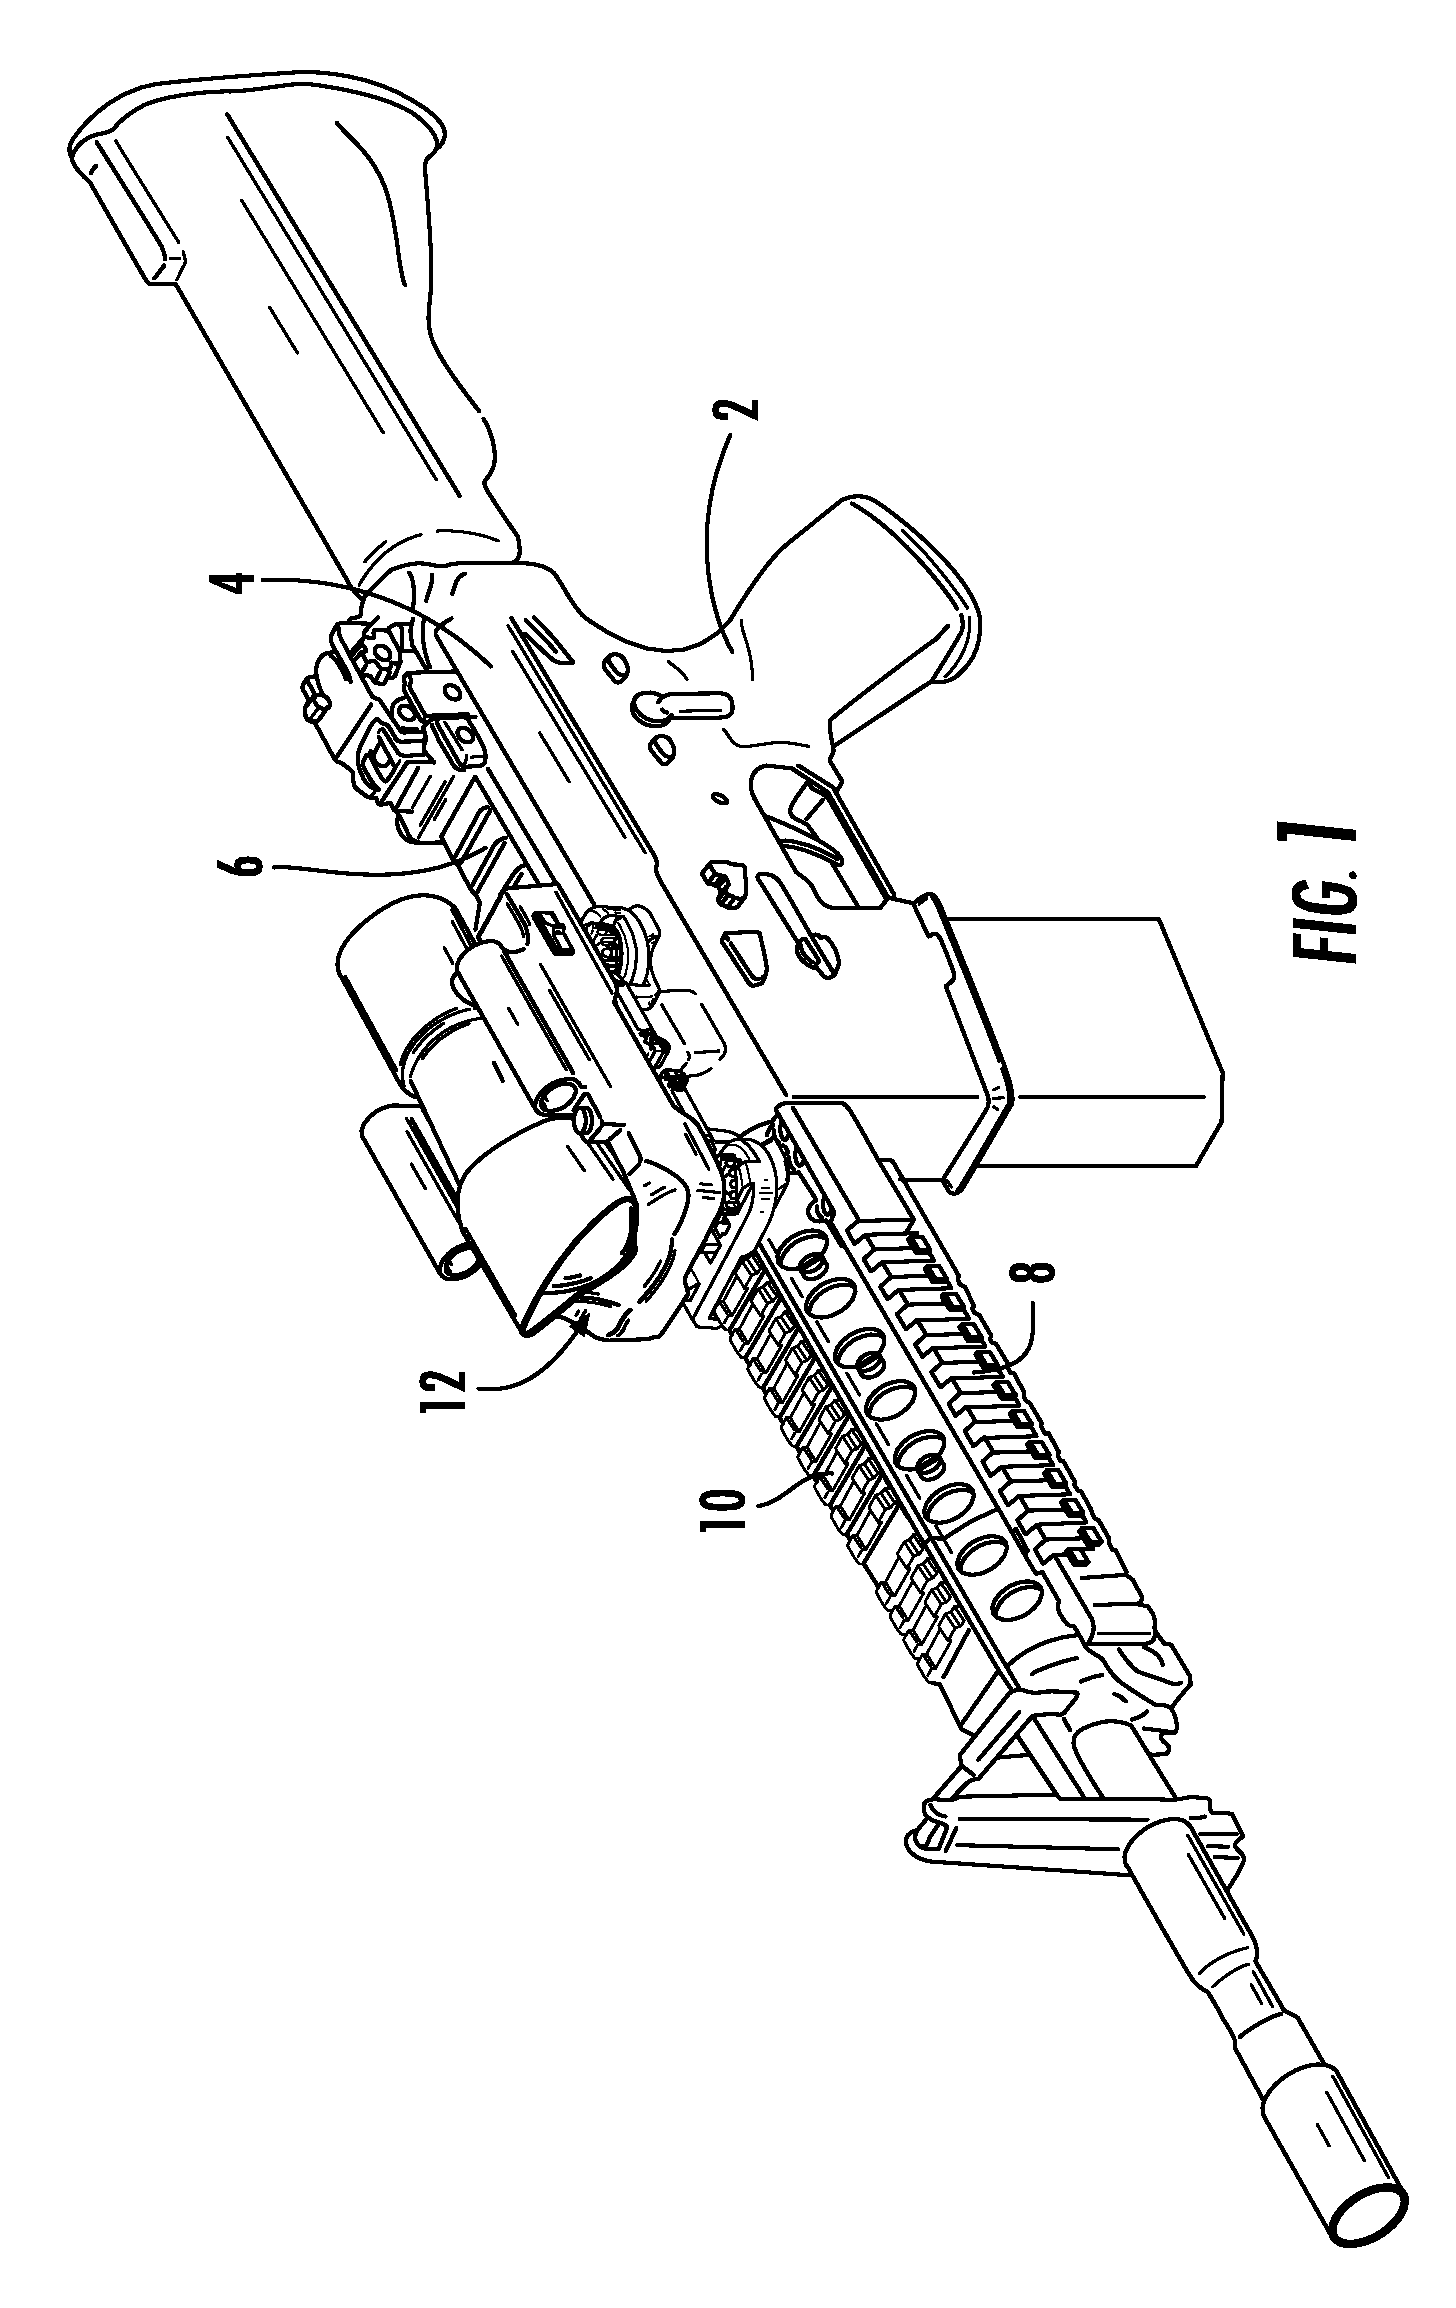 Accessory module with integrated electronic devices